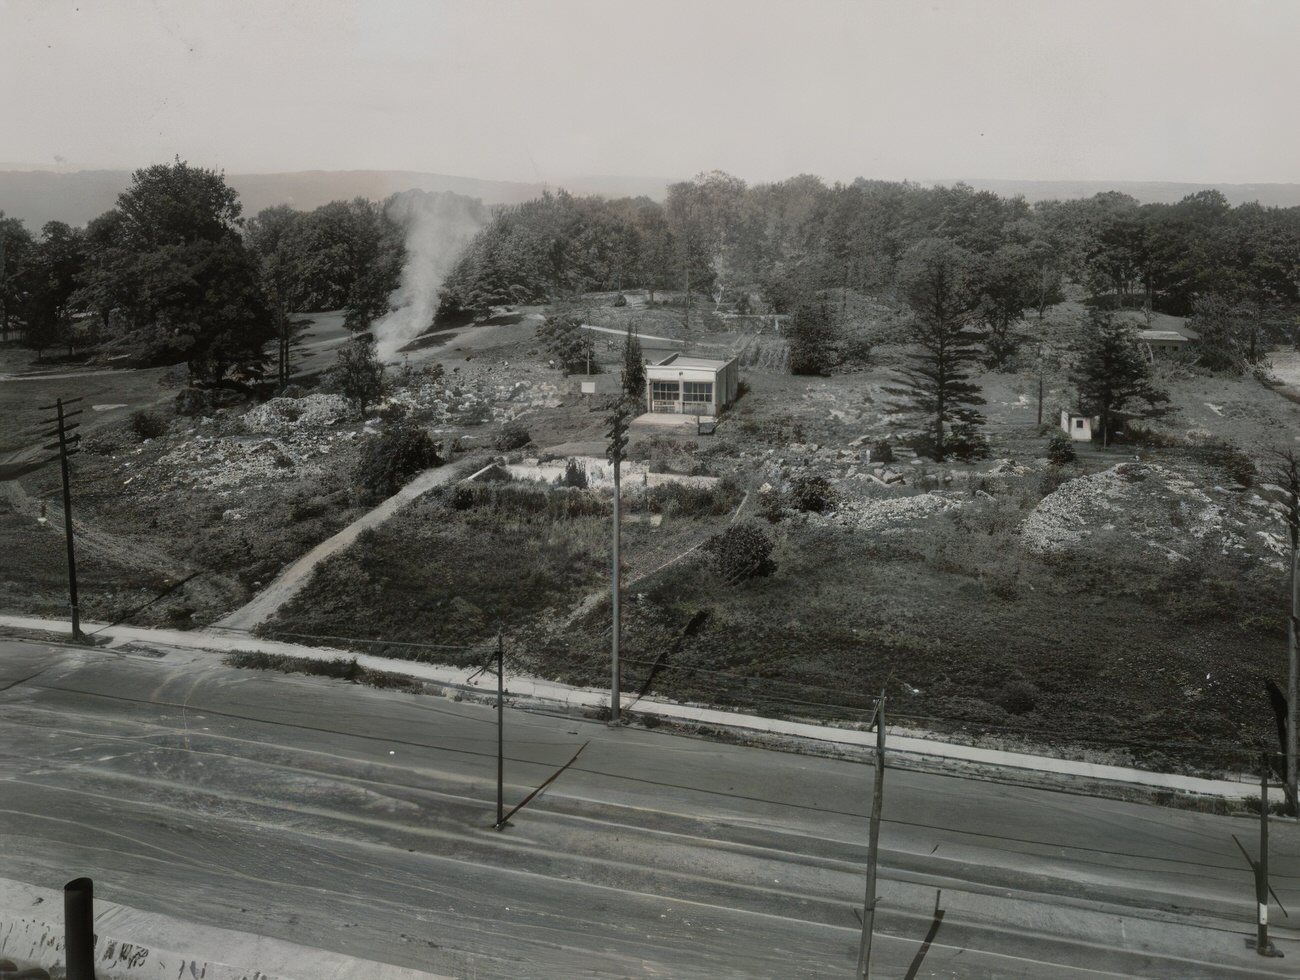 Overlooking Property On East Kingsbridge Road And 194Th Street, A Wooded Area With A Small House, Circa 1920.